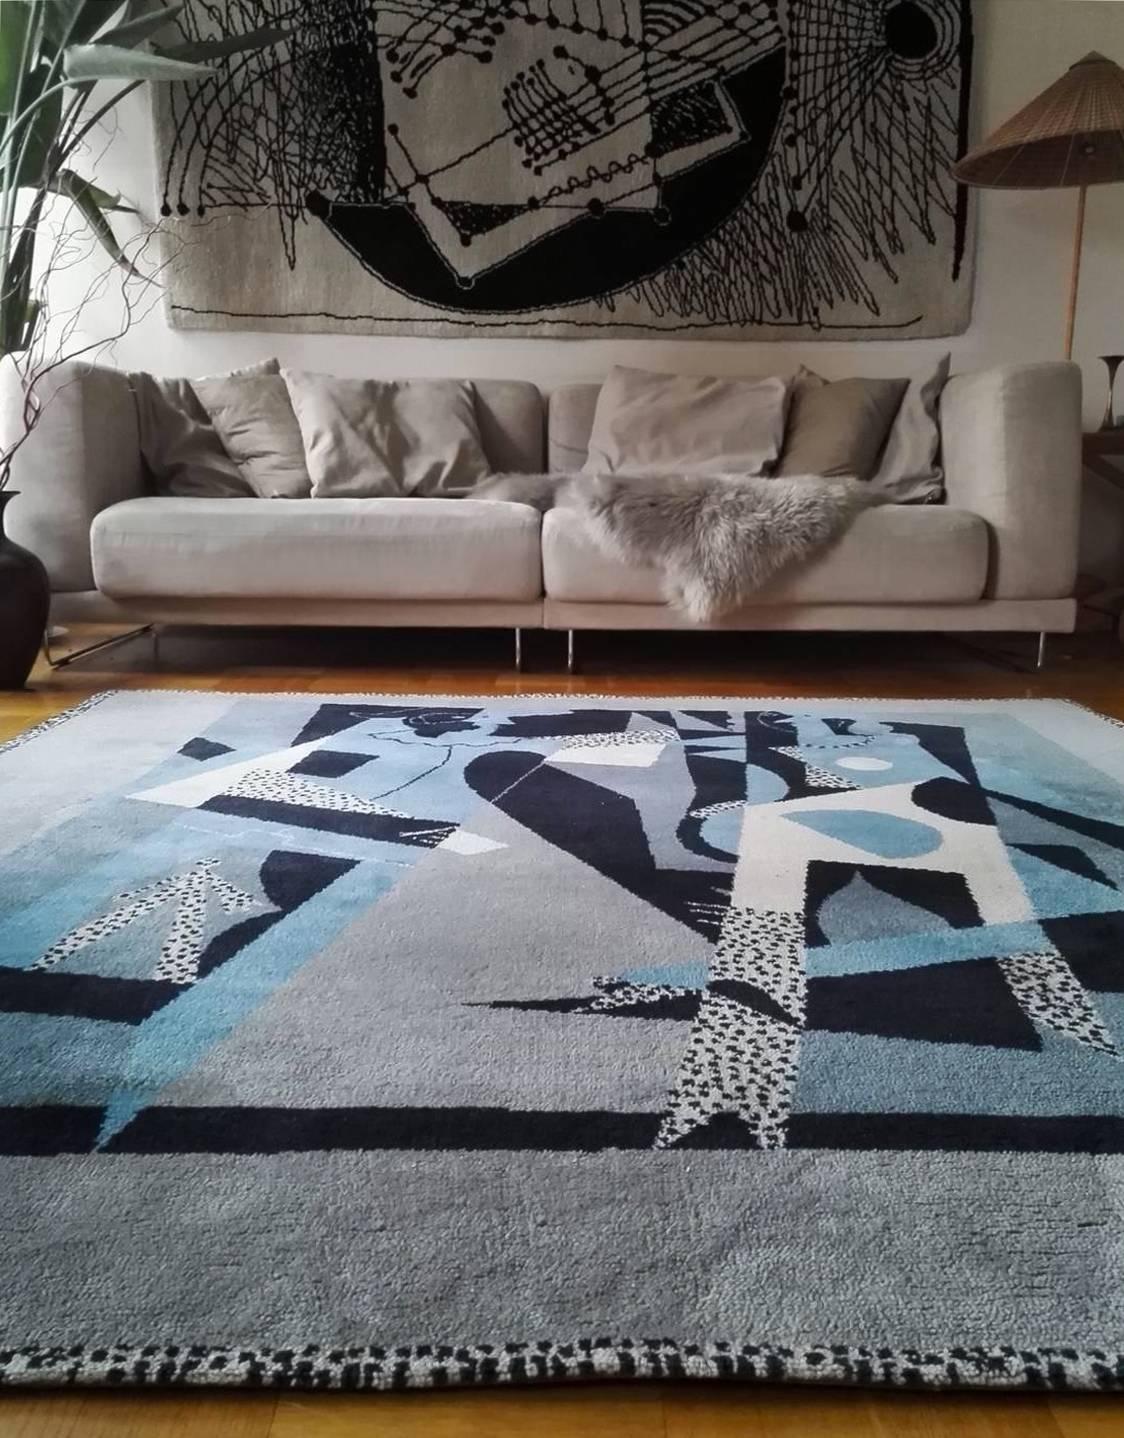 Dutch Pablo Picasso Tapestry Rug (After), Harlequin and 